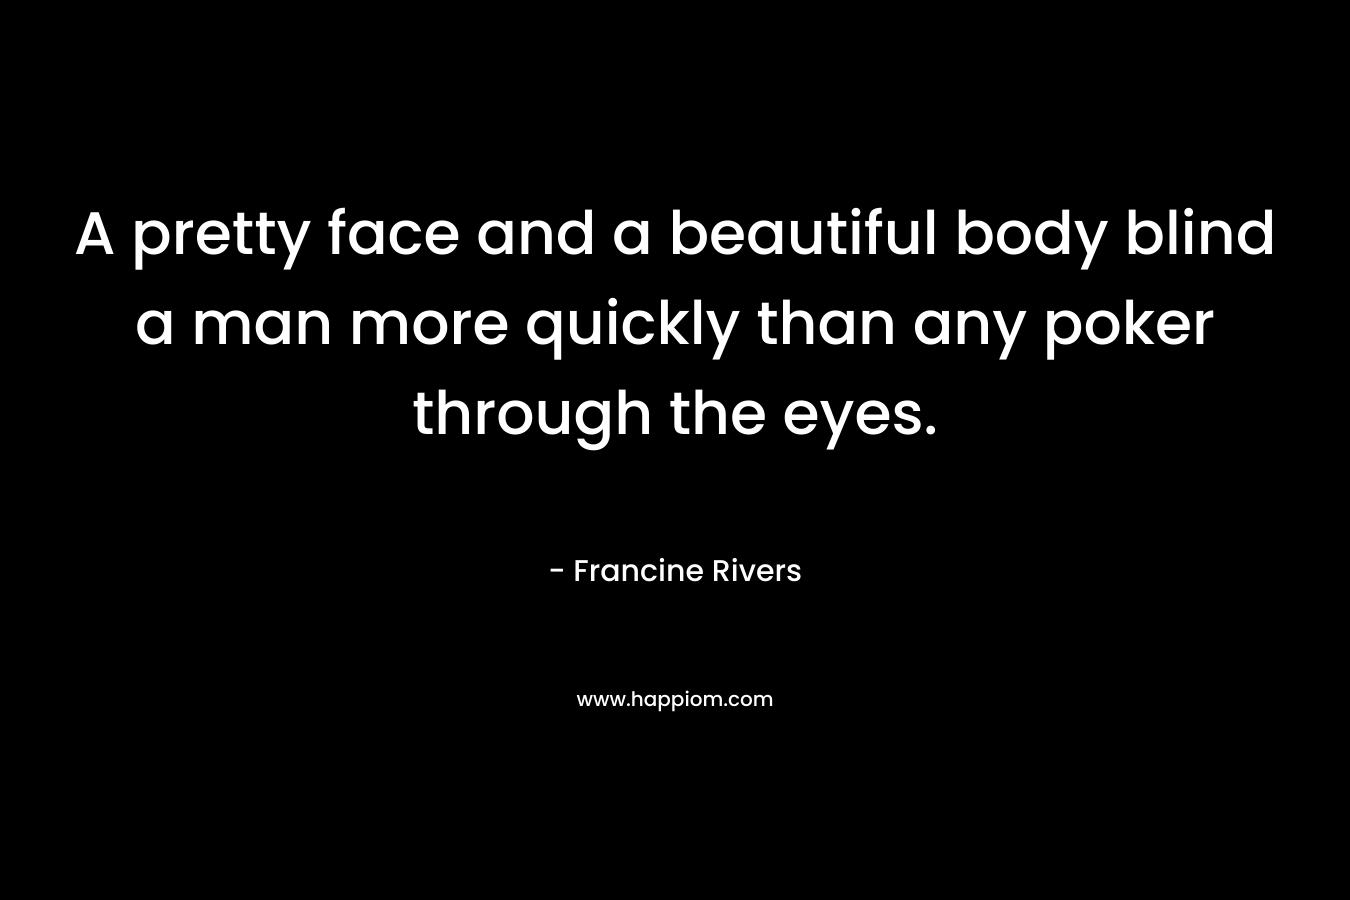 A pretty face and a beautiful body blind a man more quickly than any poker through the eyes. – Francine Rivers